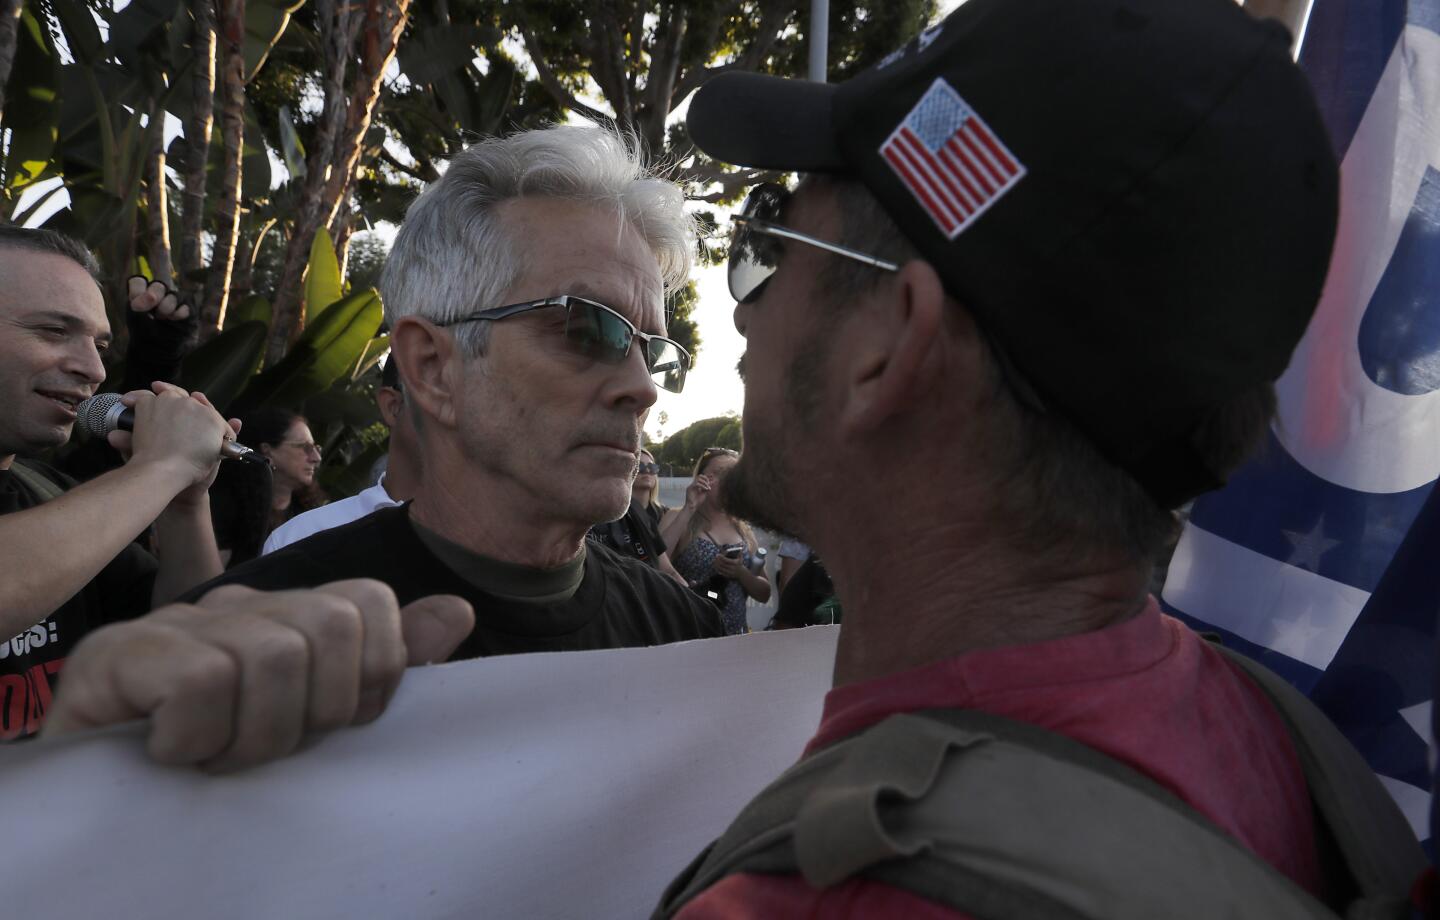 BEVERLY HILLS, CALIF. - SEP. 17, 2019. A supporter of President Donald Trump, right, goes face to face with anti-Trump protesters at the intersection of Sunset Boulevard and Benedict Canyon Road in Beverly Hills on Tuesday, Sept. 17, 2019. As the factions clashed, Trump attended a fundraiser nearnby at the home of real estate developer Geoff Palmers. (Luis Sinco/Los Angeles Times)